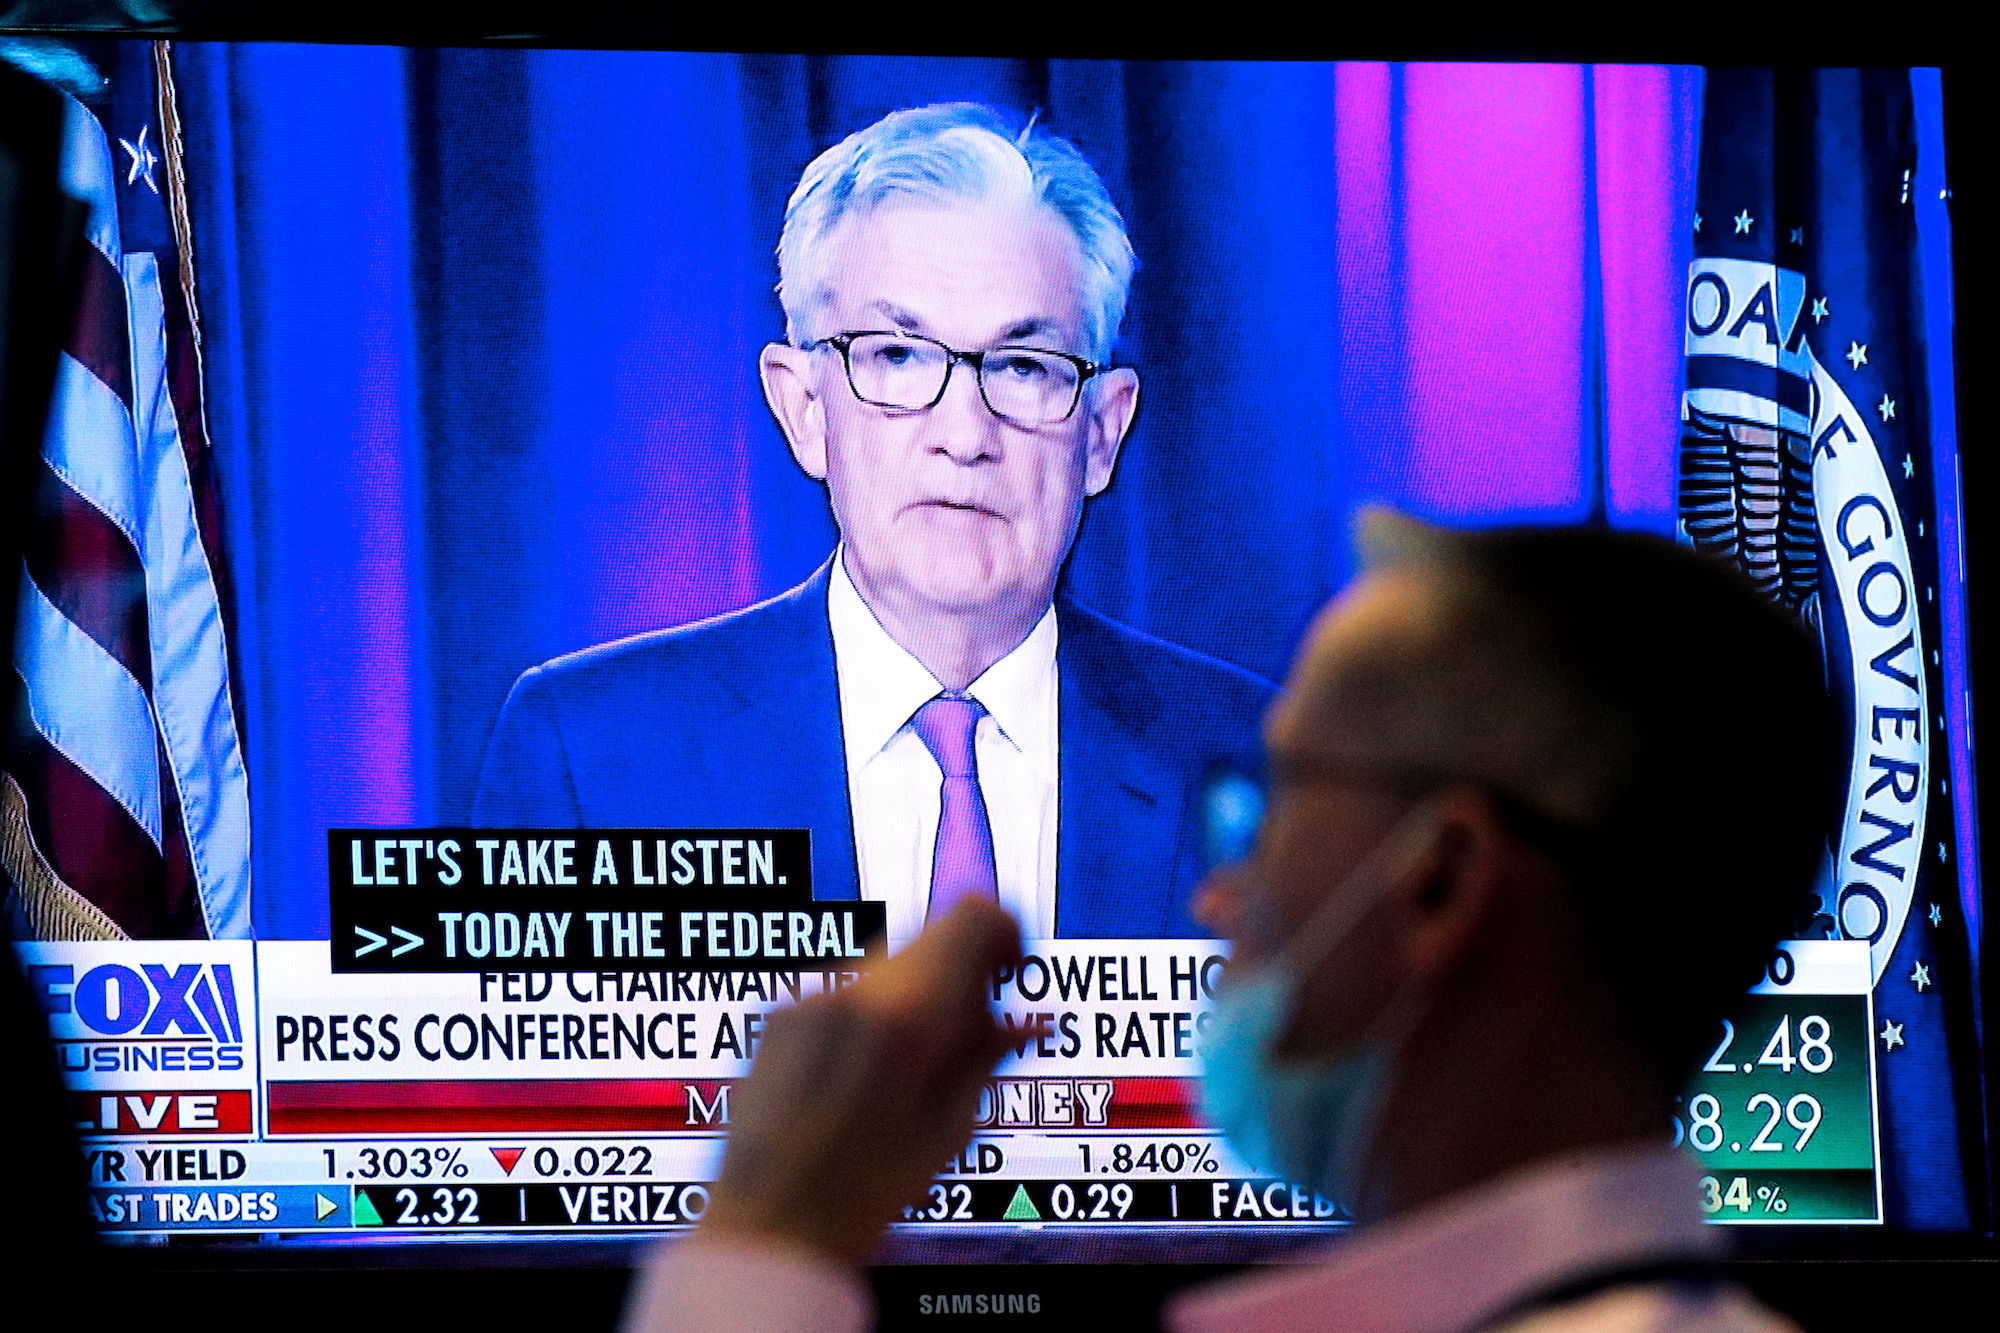 A screen displays a statement by Federal Reserve Chair Jerome Powell as a trader works on the floor of the New York Stock Exchange in New York City, U.S., September 22, 2021.